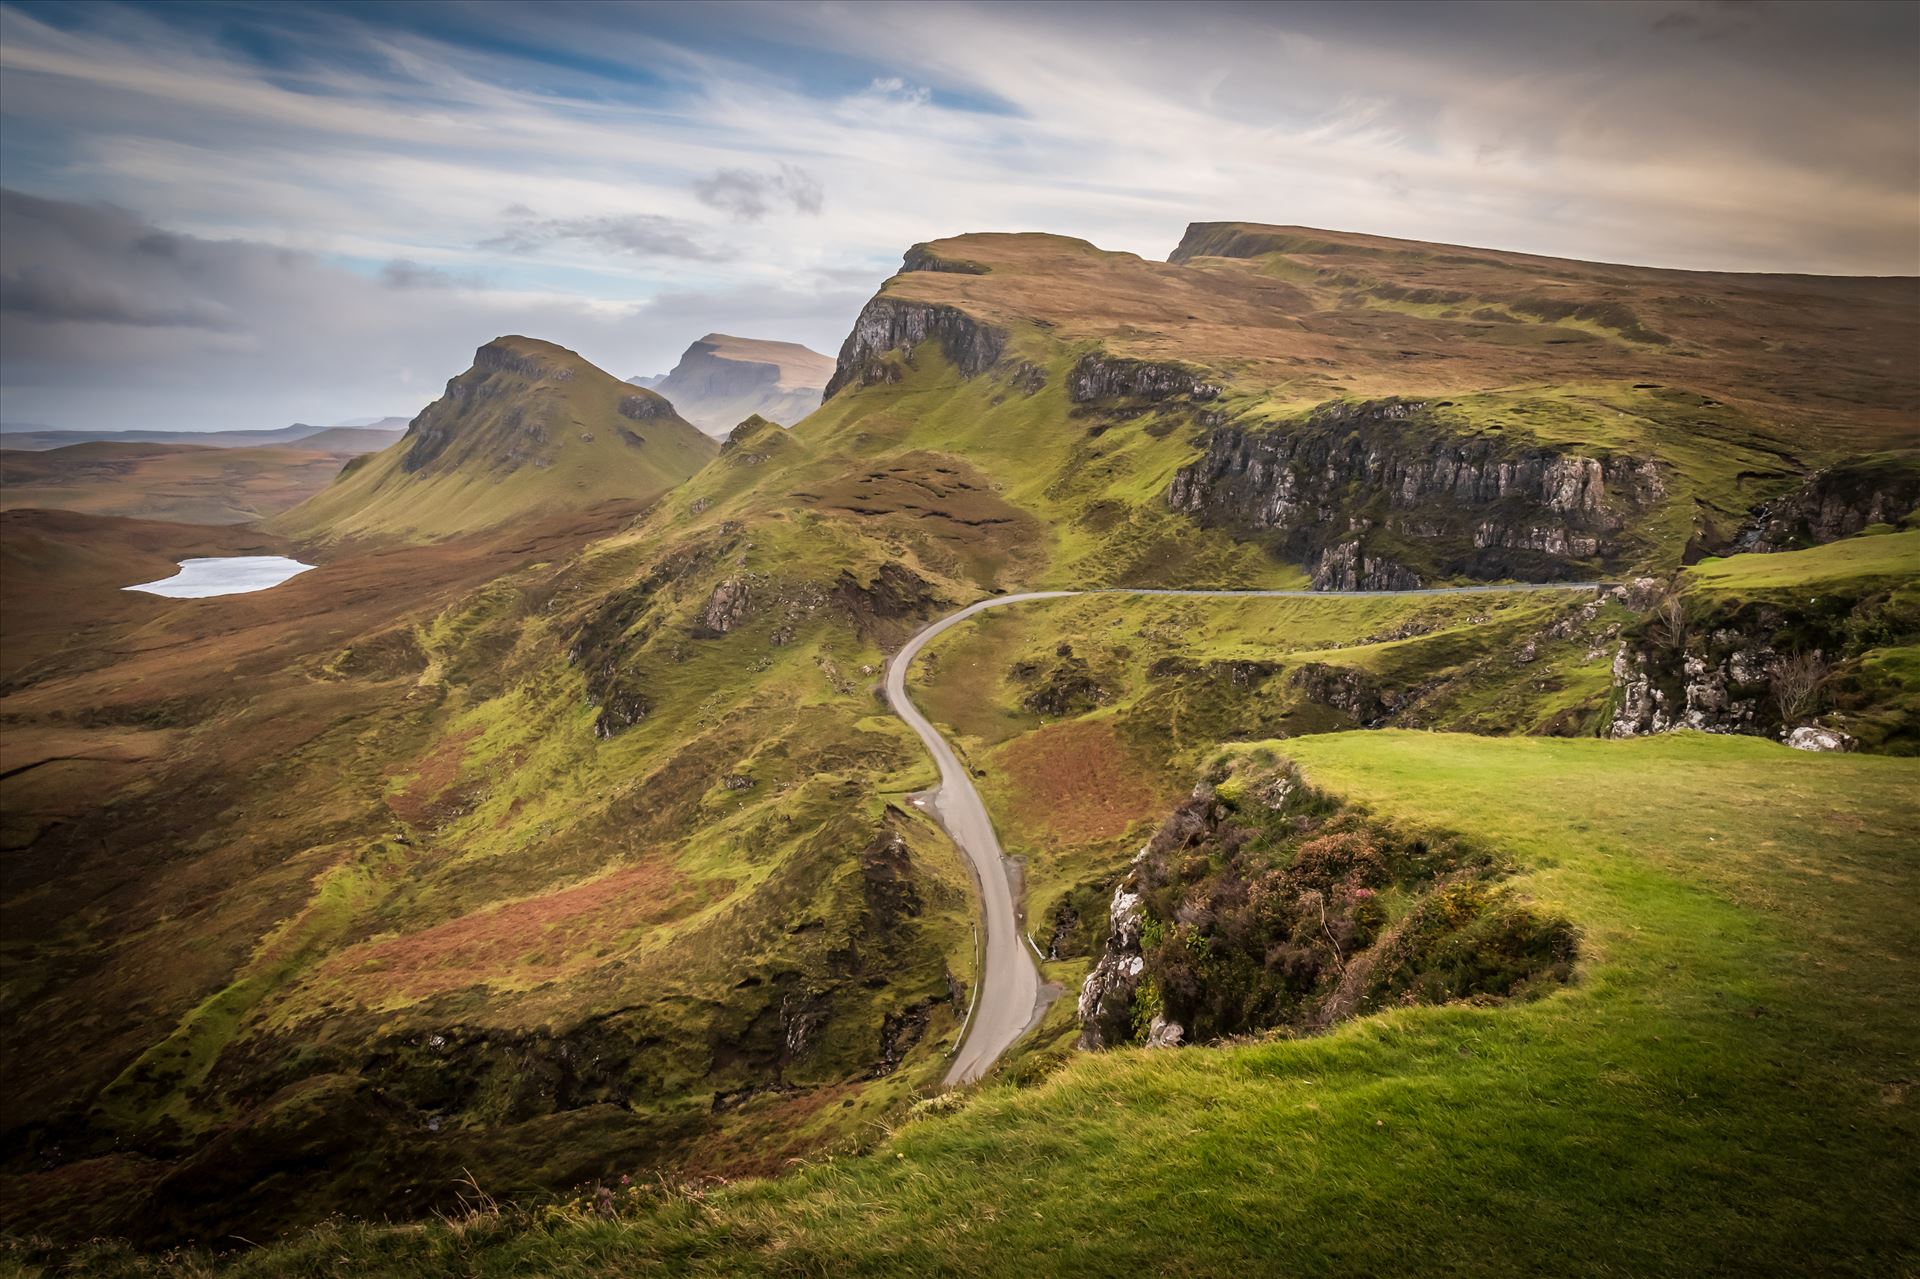 The Quiraing (2) The Quiraing is a landslip on the northernmost summit of the Trotternish on the Isle of Skye. The whole of the Trotternish Ridge escarpment was formed by a great series of landslips, the Quiraing is the only part of the slip still moving. by philreay